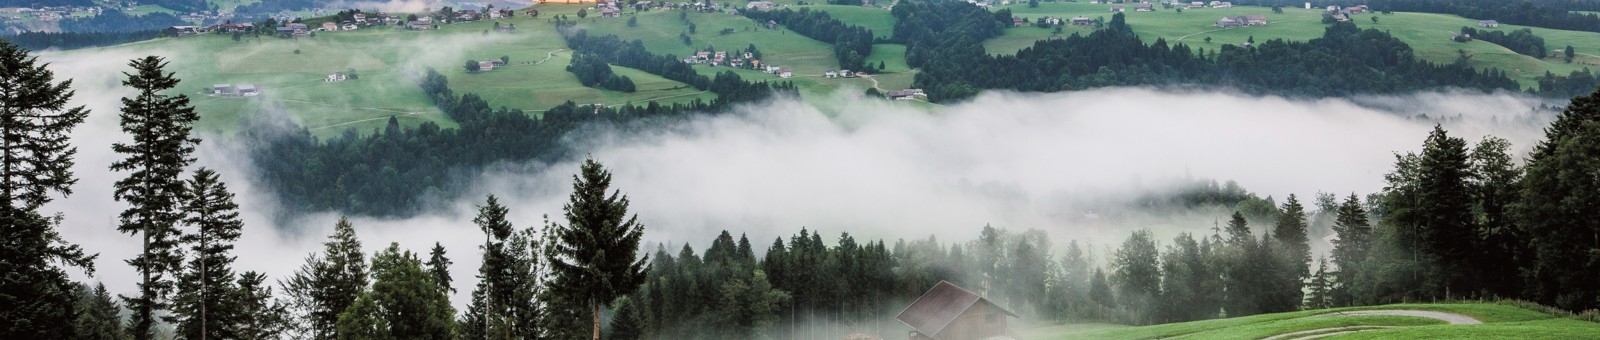     The Bregenzerwald region is known for rooted agriculture and handicraft but with a modern touch 